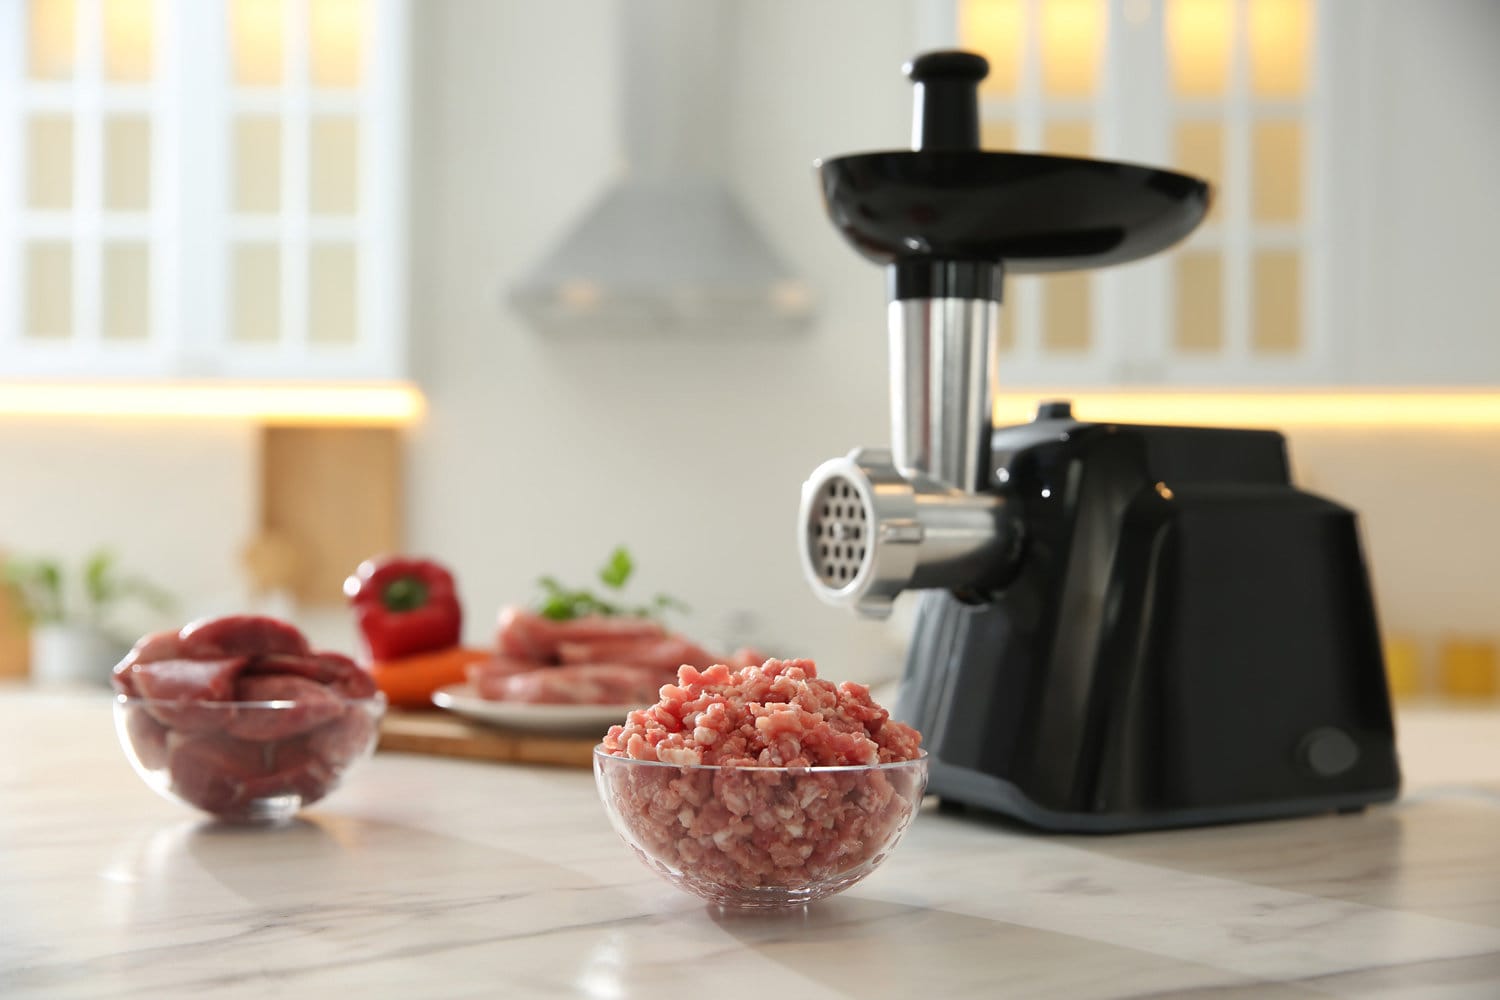 Modern grinder in kitchen, focus on bowl of minced meat. Space for text